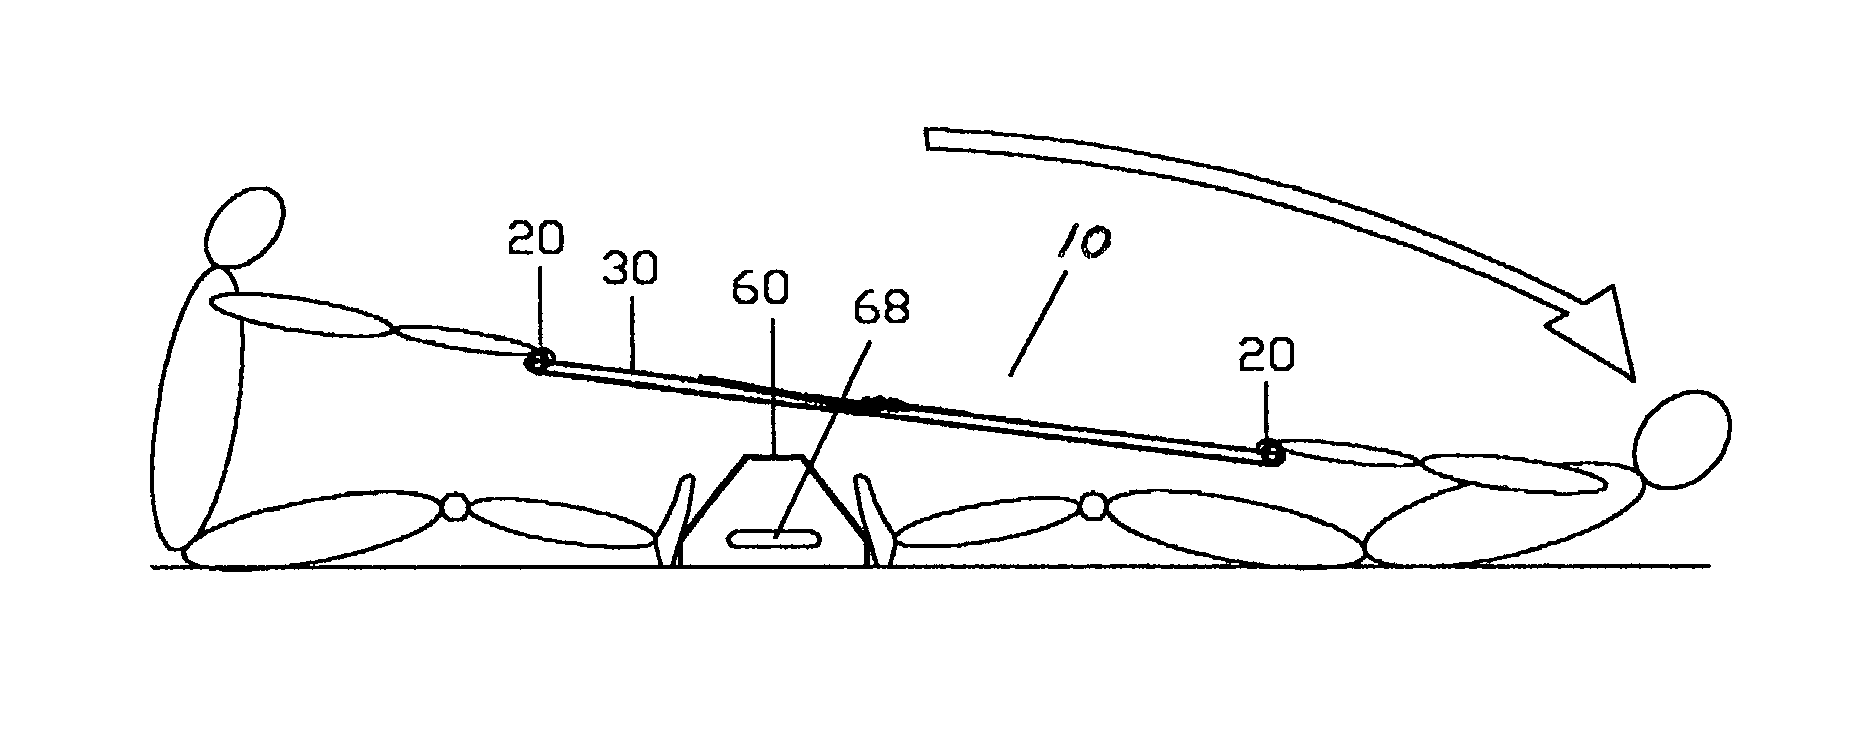 Portable exercise apparatus for sit-up exercise